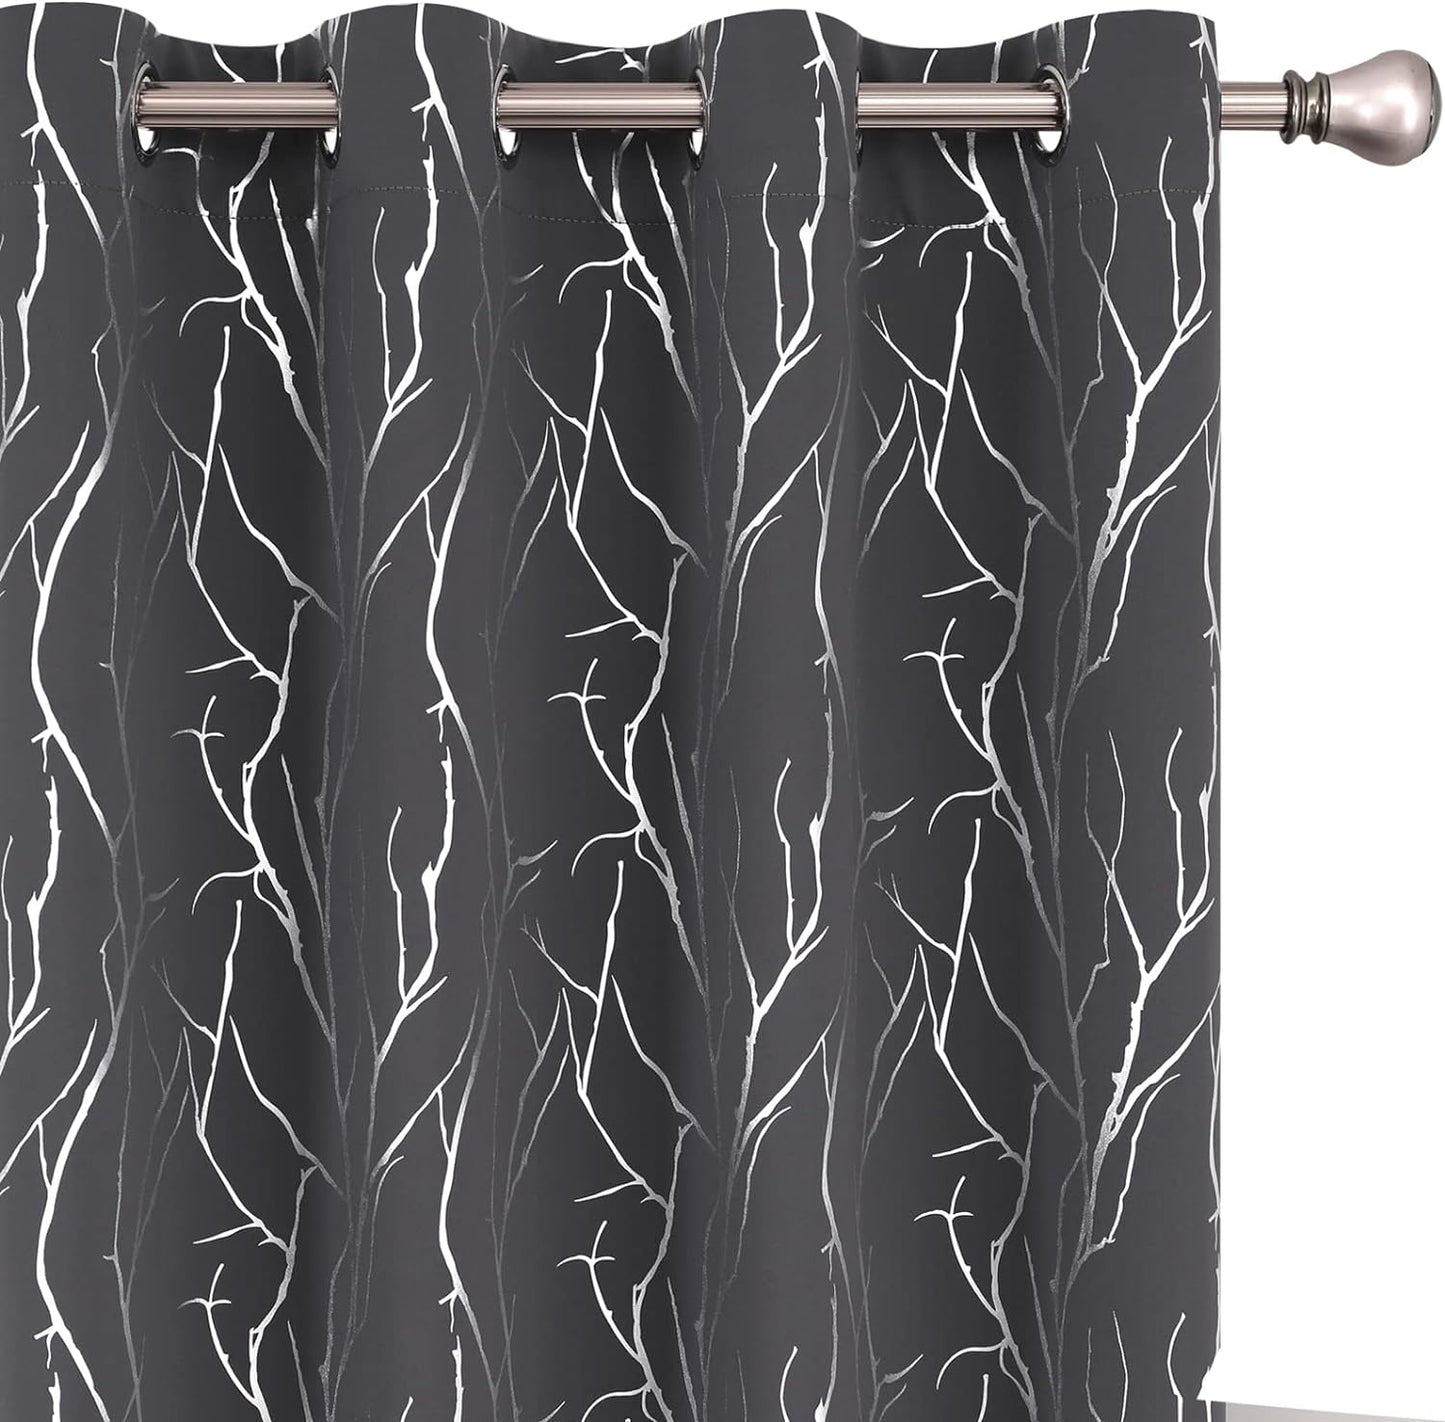 SMILE WEAVER Black Blackout Curtains for Bedroom 72 Inch Long 2 Panels,Room Darkening Curtain with Gold Print Design Noise Reducing Thermal Insulated Window Treatment Drapes for Living Room  SMILE WEAVER Tree Branch-Dark Grey 52Wx84L 